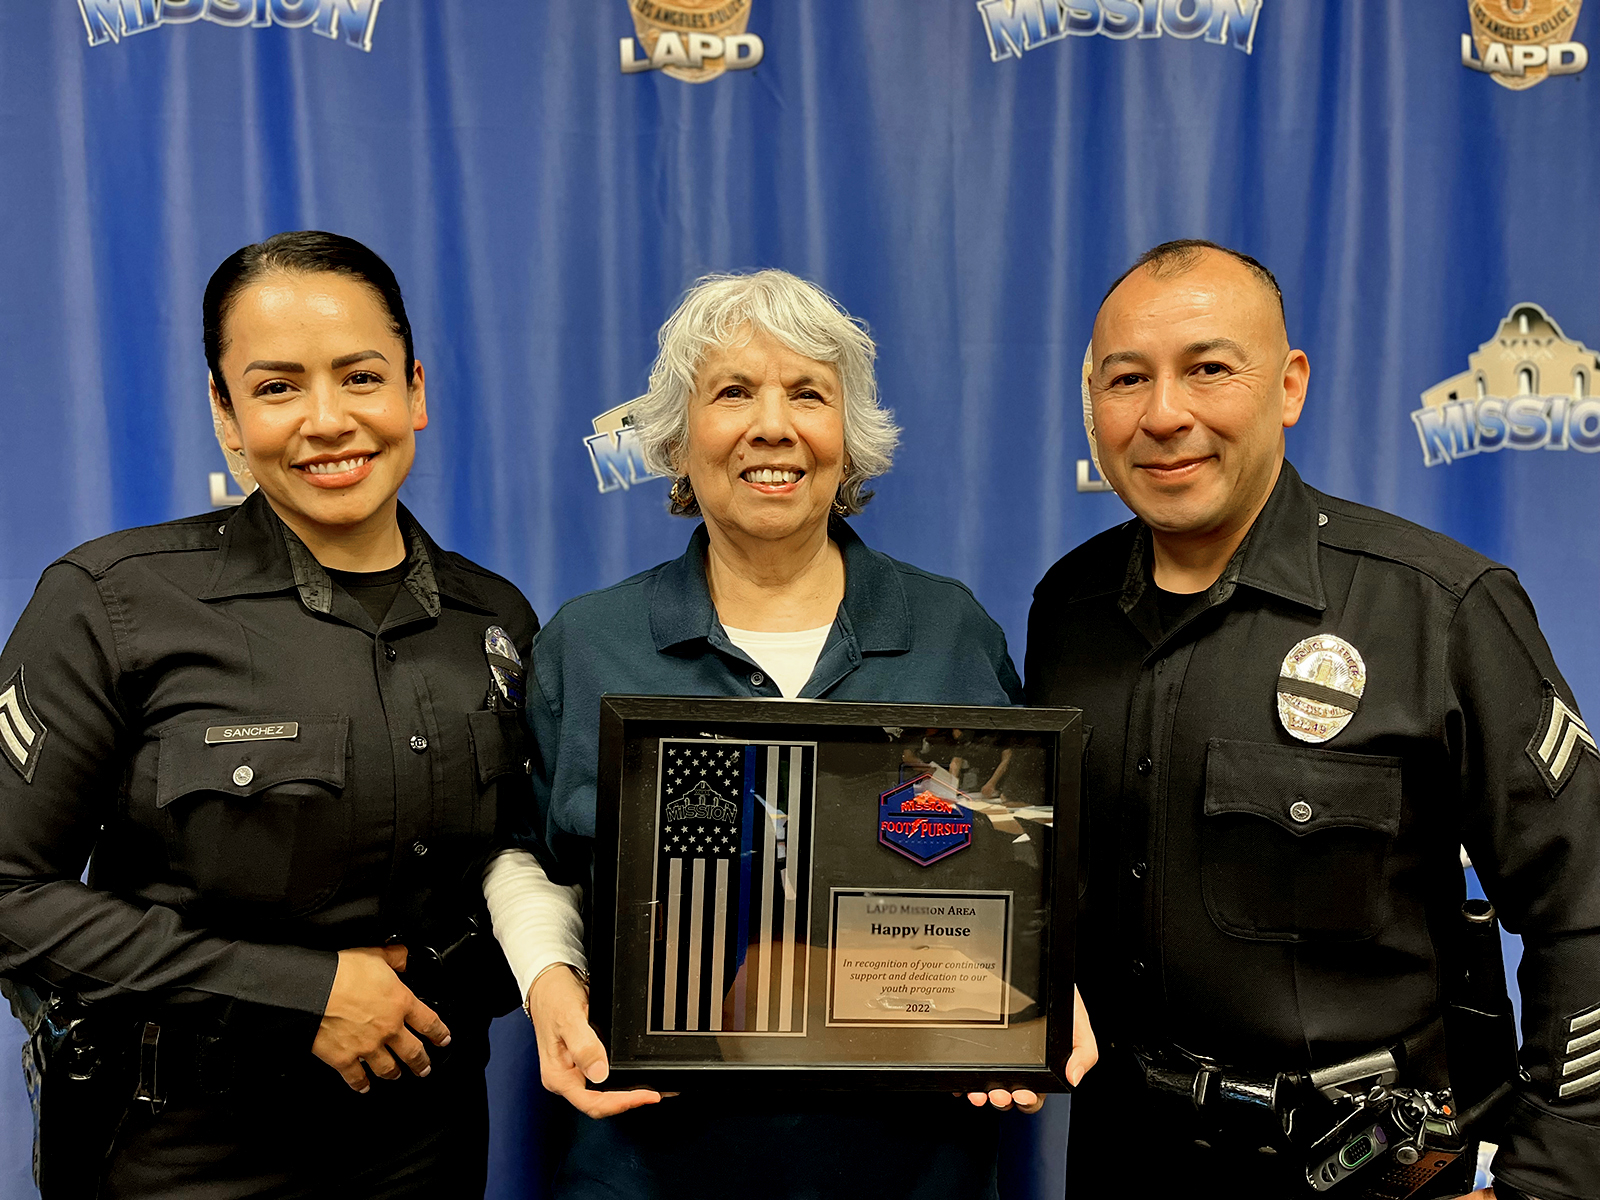 An award from LAPD Mission Station as a thanks for sponsoring their annual 5k run.